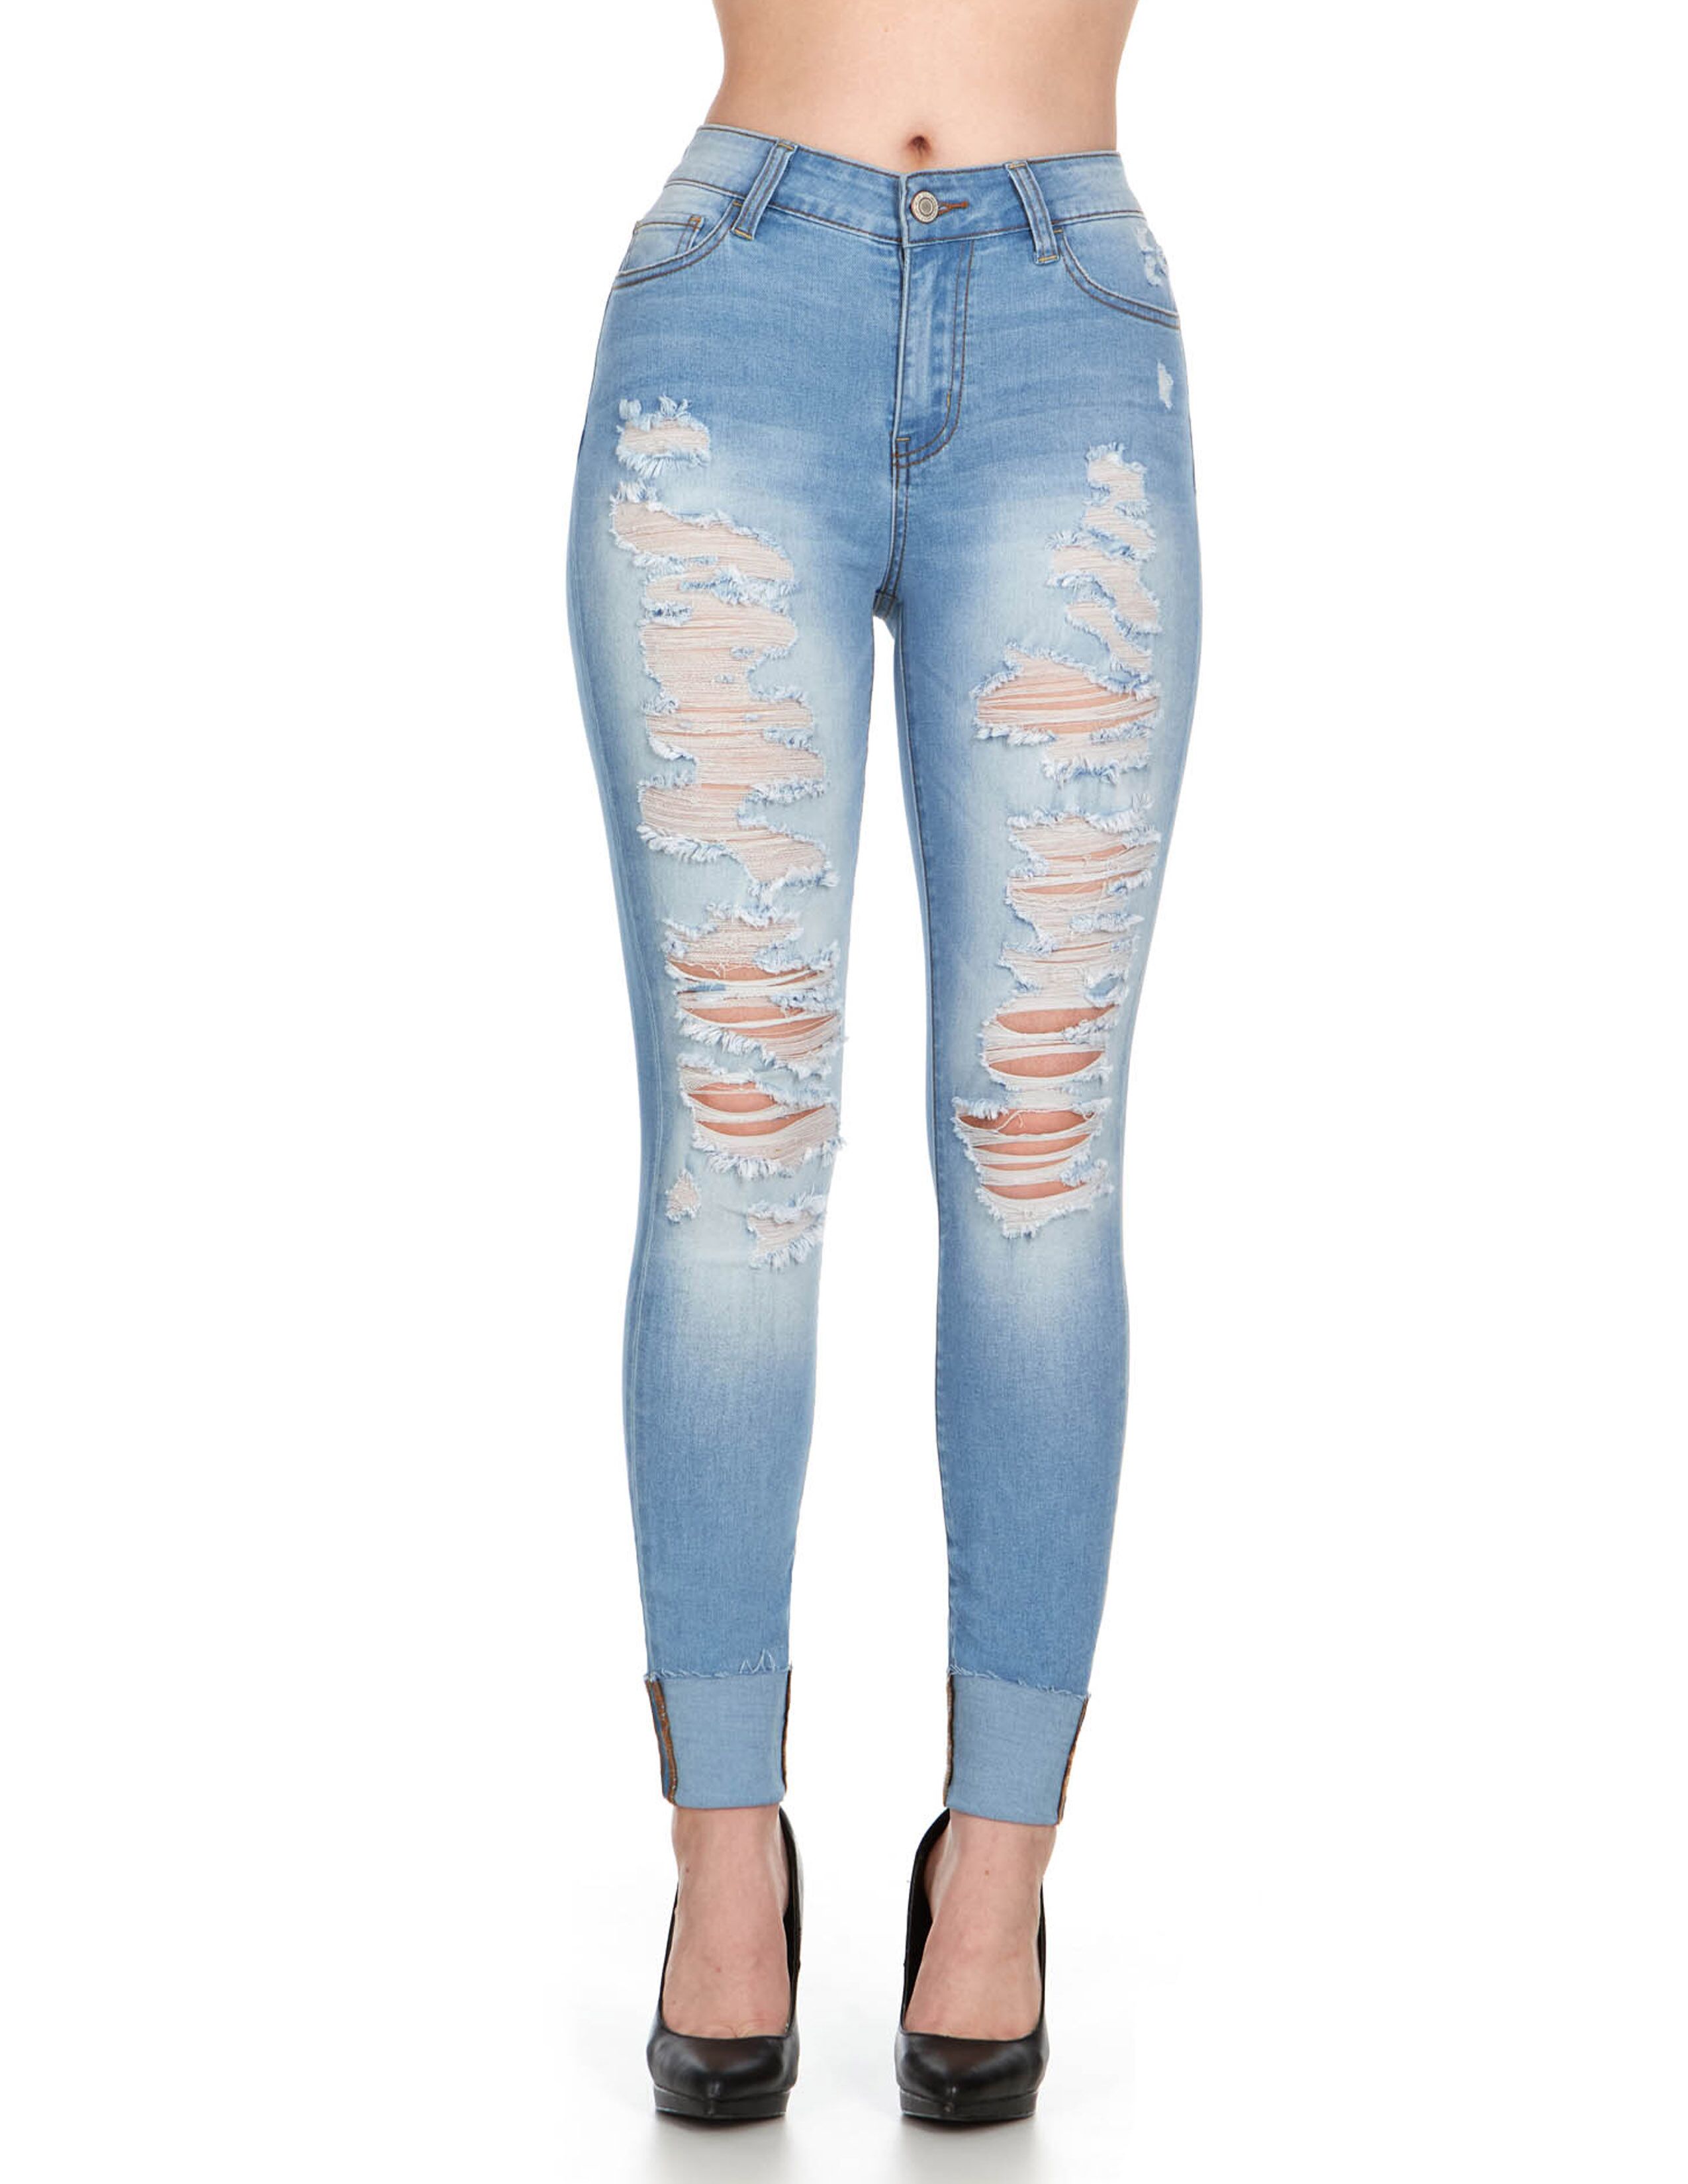 high waisted distressed skinny jeans